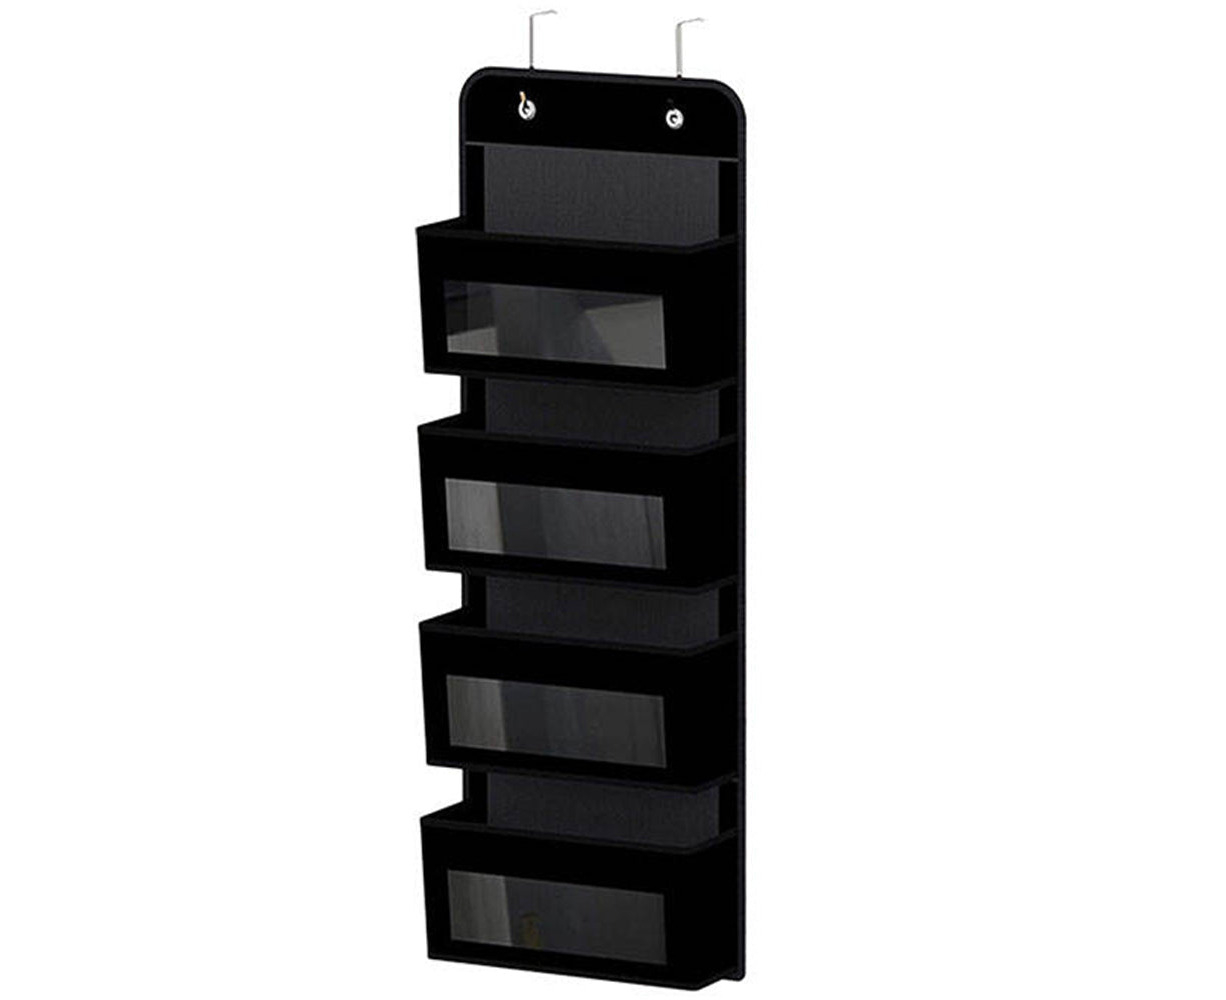 DHOUTDOORS 4 Tier Over Door Hanging Organiser Hanging Hooks Closet Storage Wall Mount for Toys Keys Notebooks Planners File Folders System Black Magazine Purses Sunglasses 